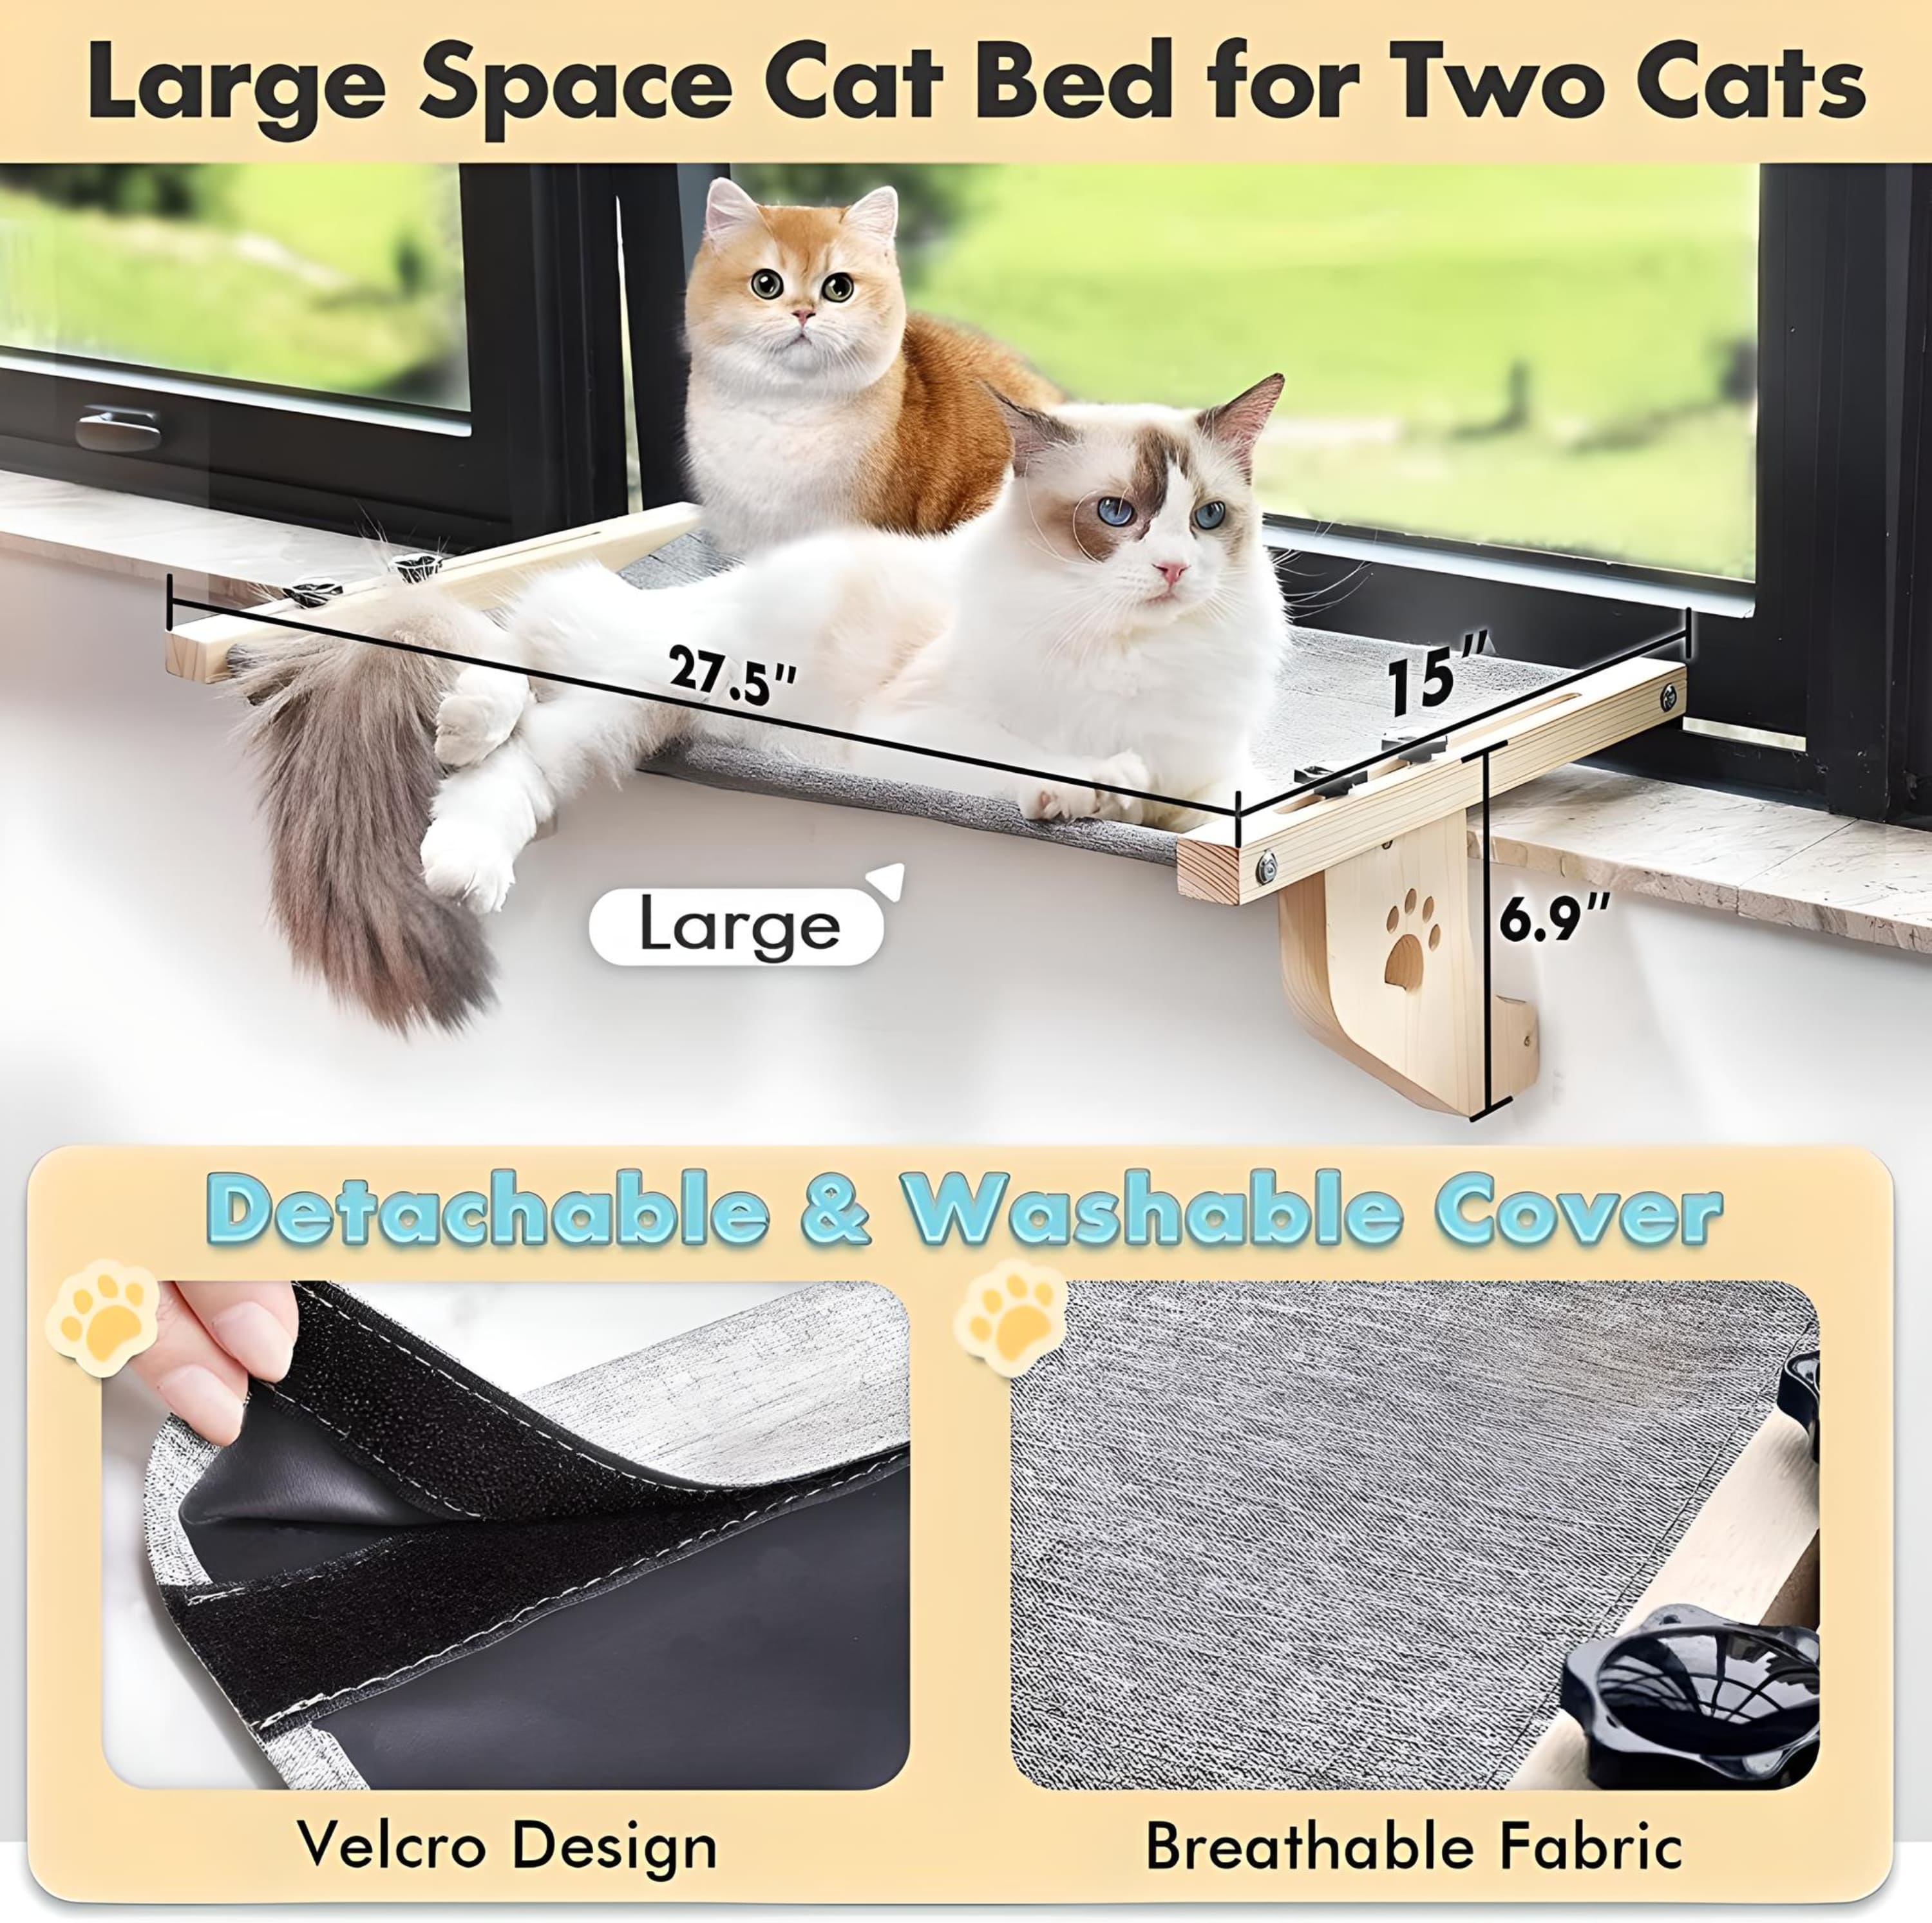    cat-bed-for-window-sill-washable-cover